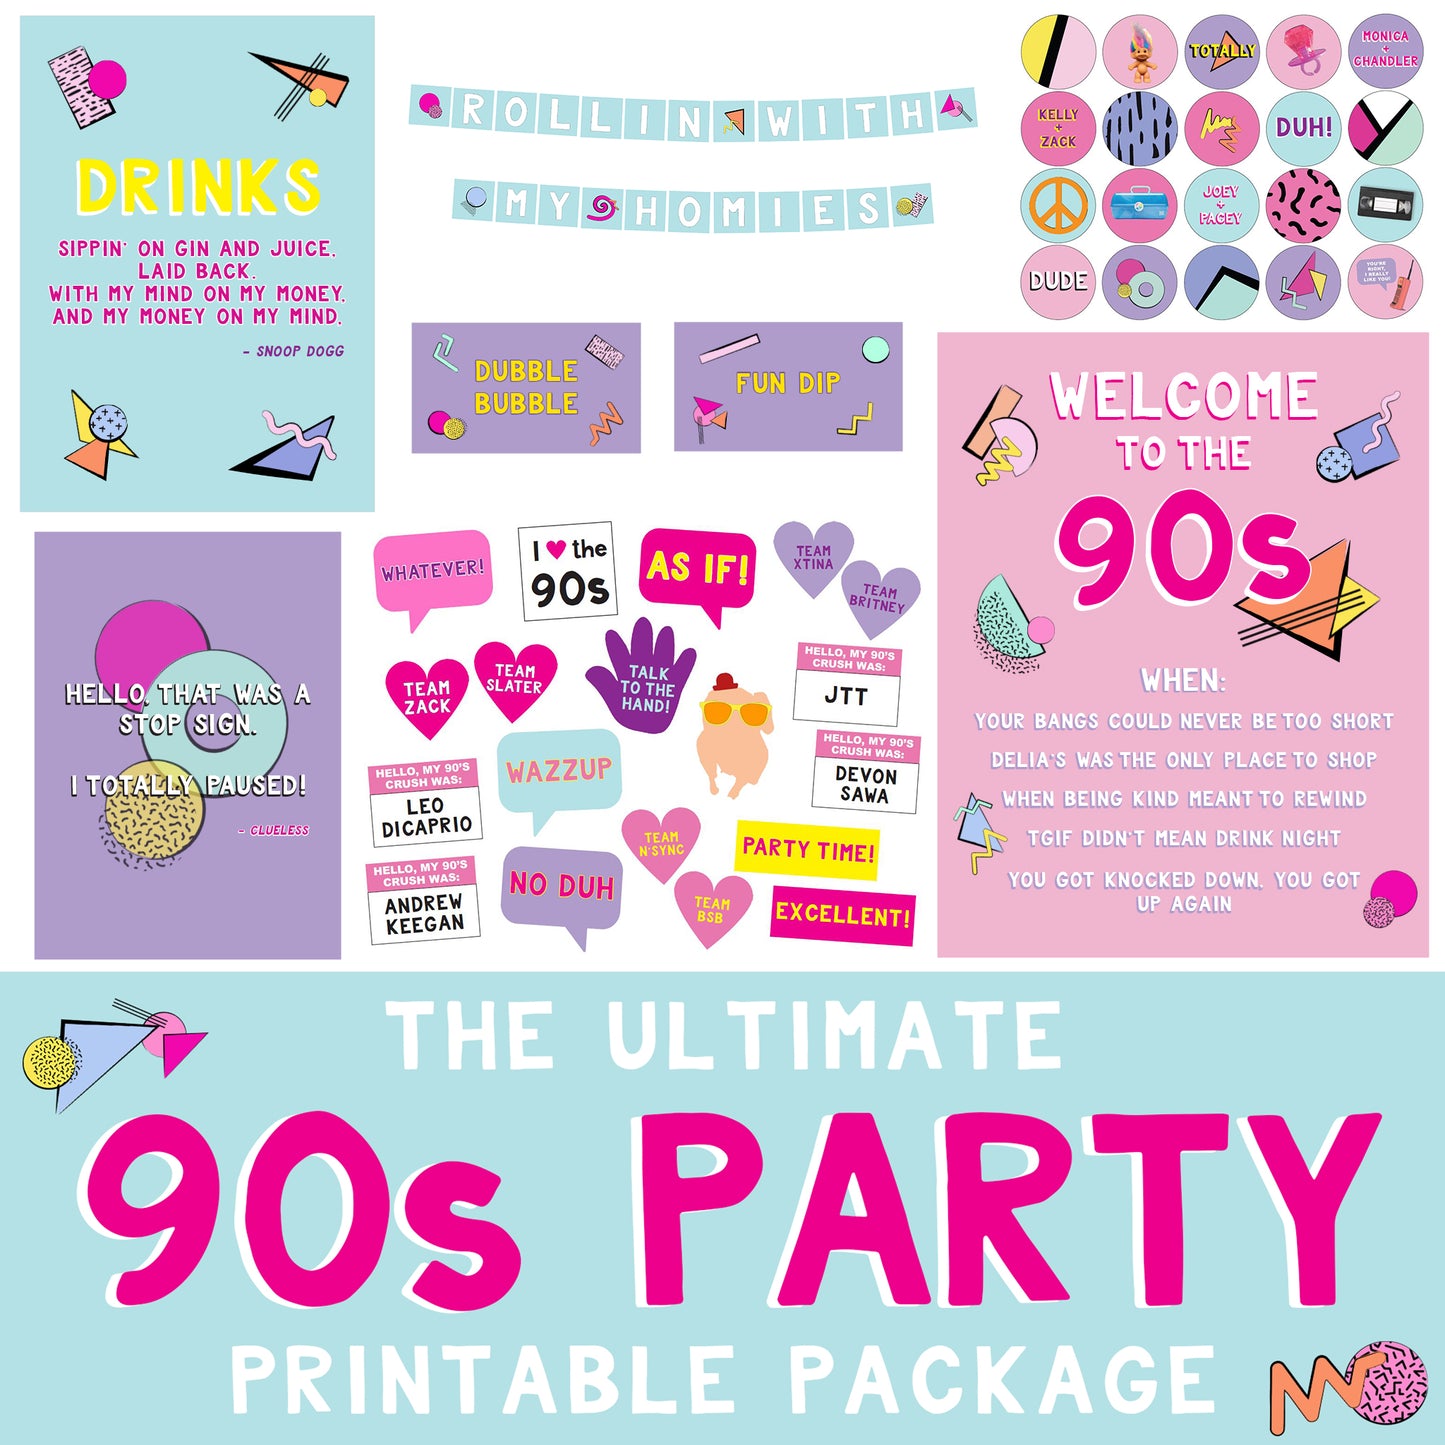 The Ultimate 90s Party Printable Package